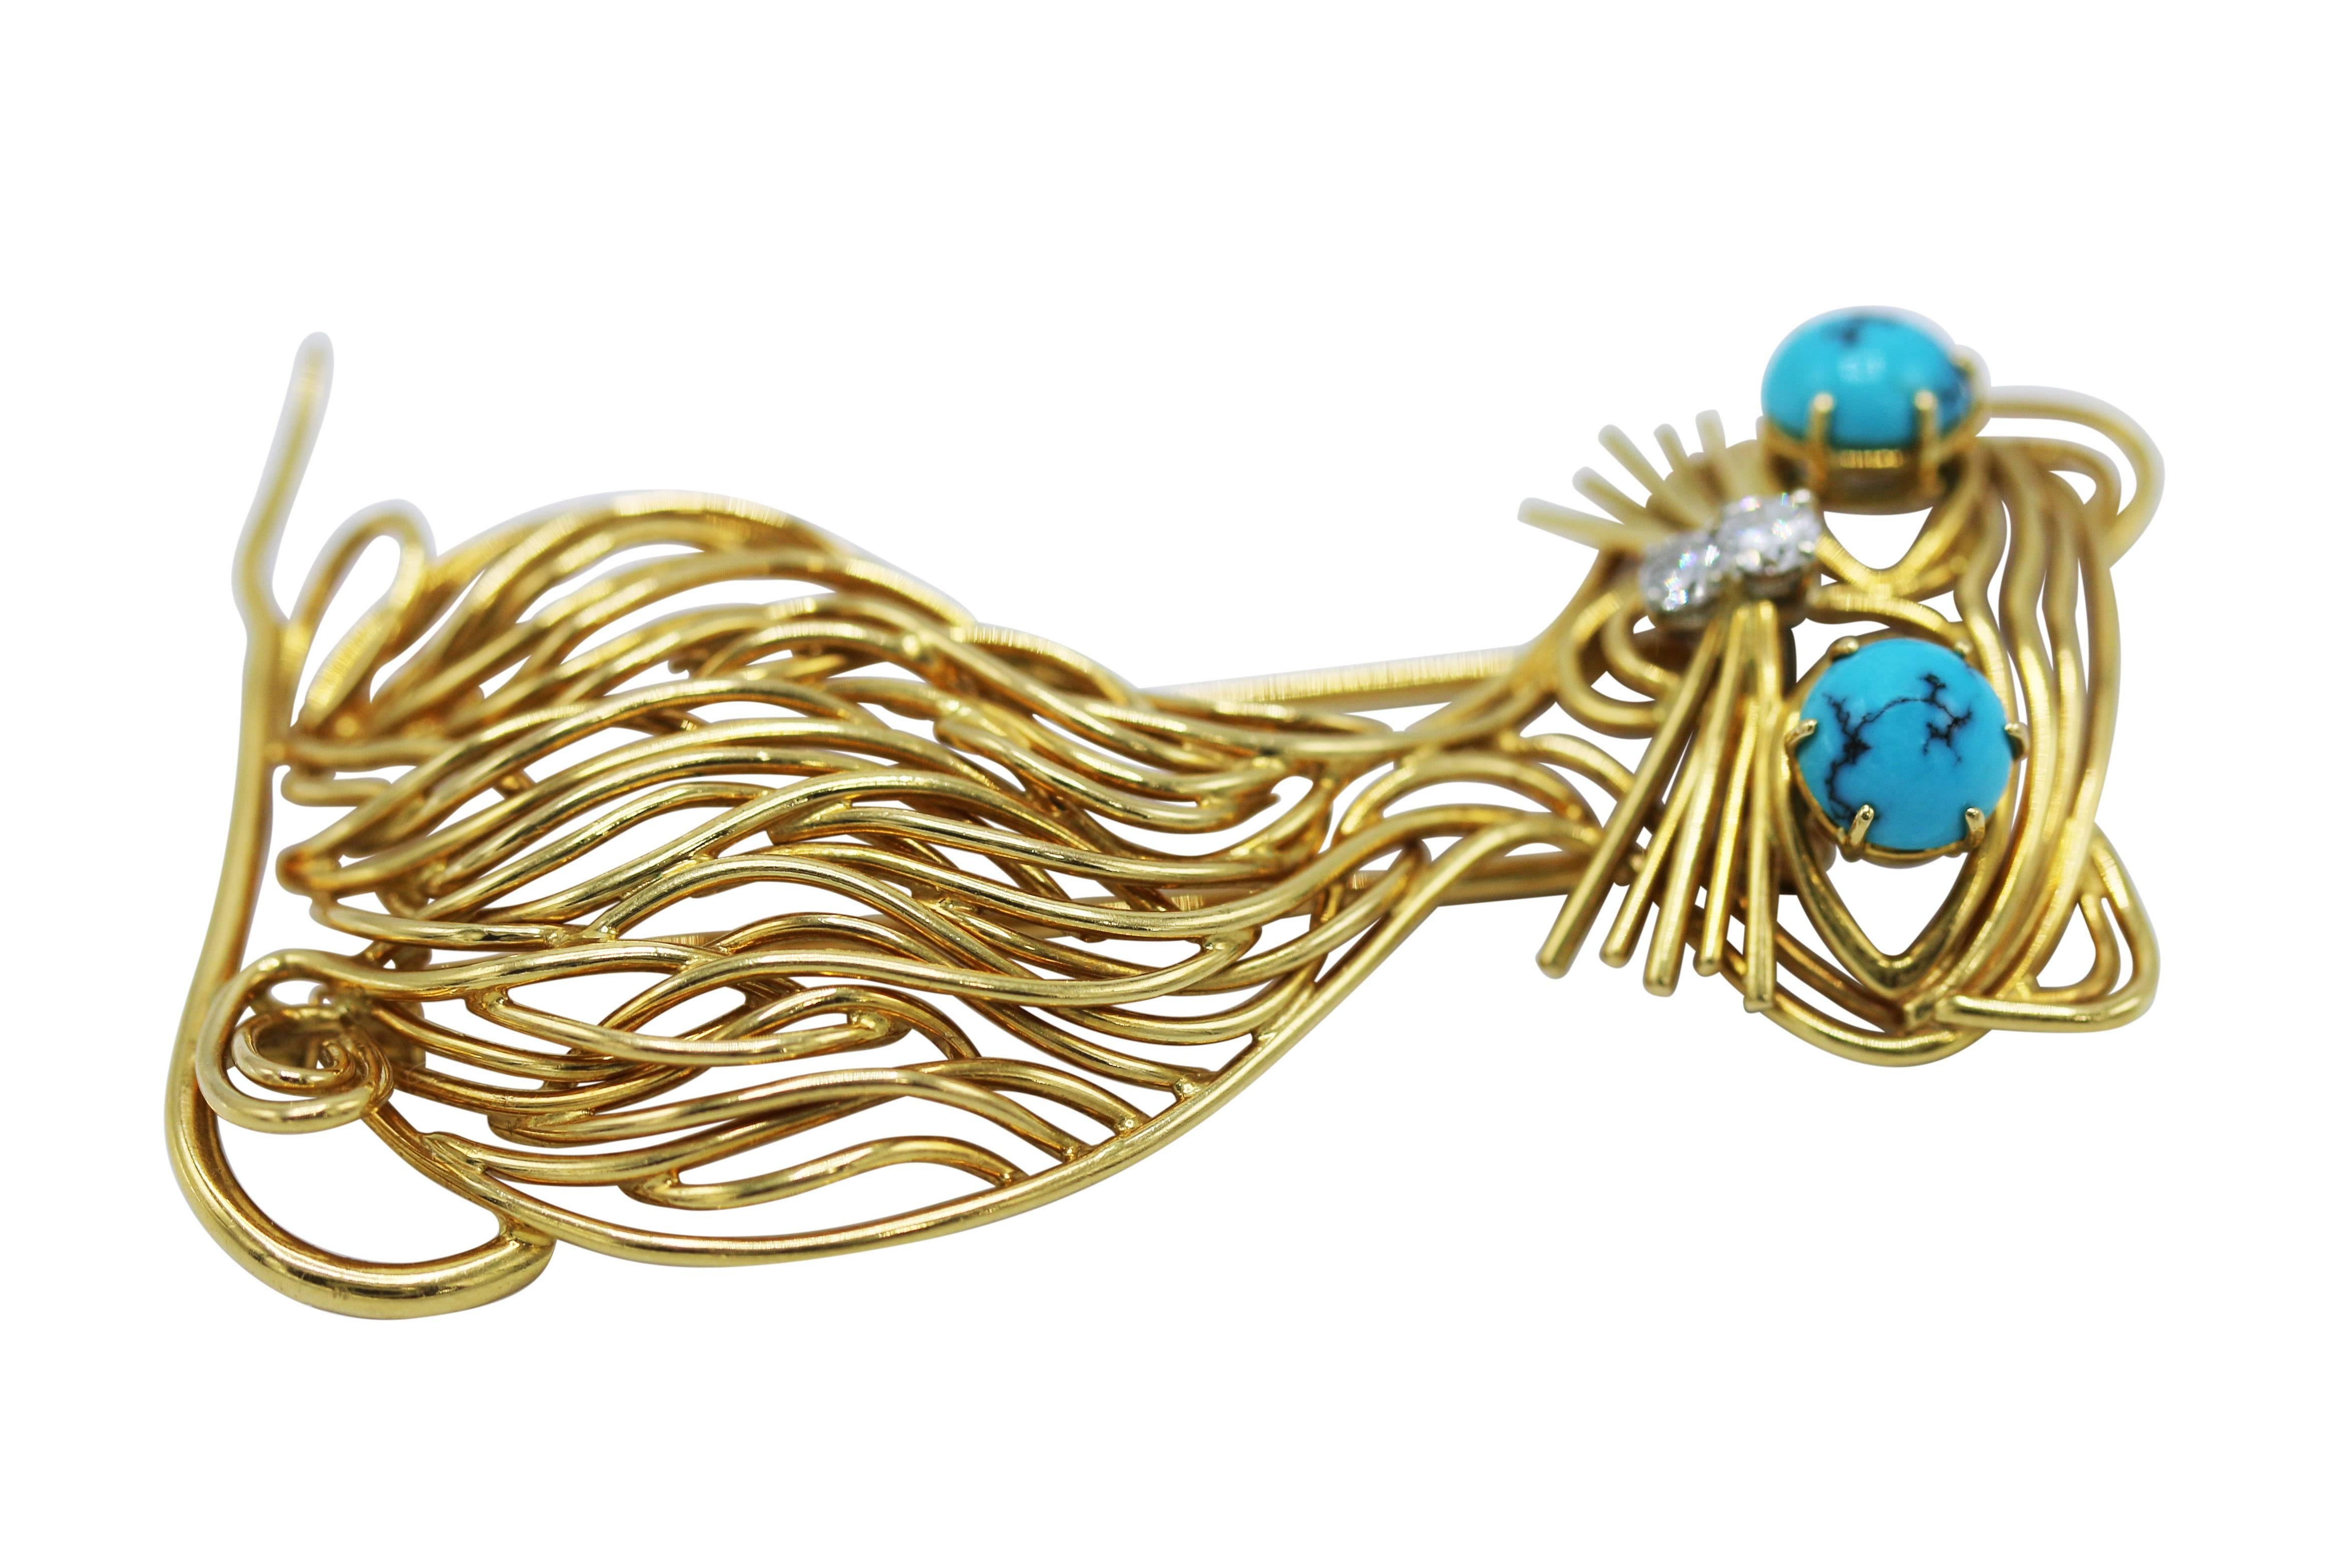 18 karat yellow gold, turquoise and diamond cat brooch, circa 1960, designed as a whimsical cat composed of polished gold tendrils, eyes set with cabochon turquoise and diamond set nose, diamond weight 0.10 carat, gross weight 23.4 grams, measuring